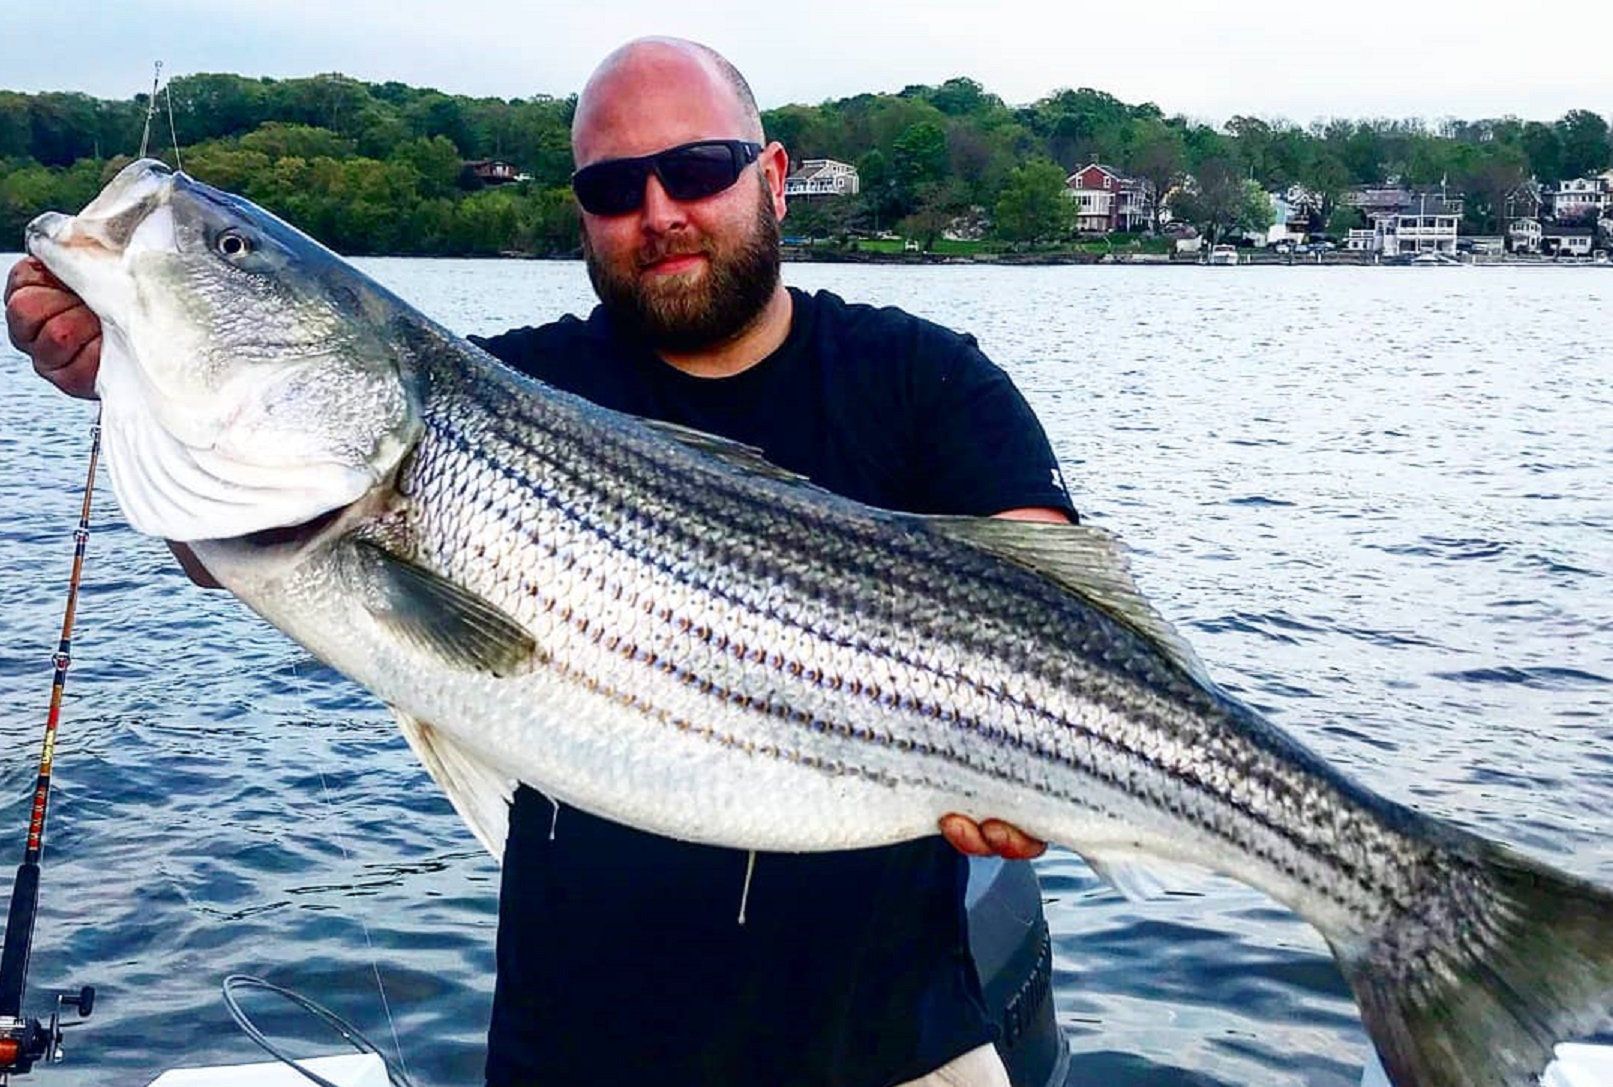 Striped bass population threatened, NYS to impose new size